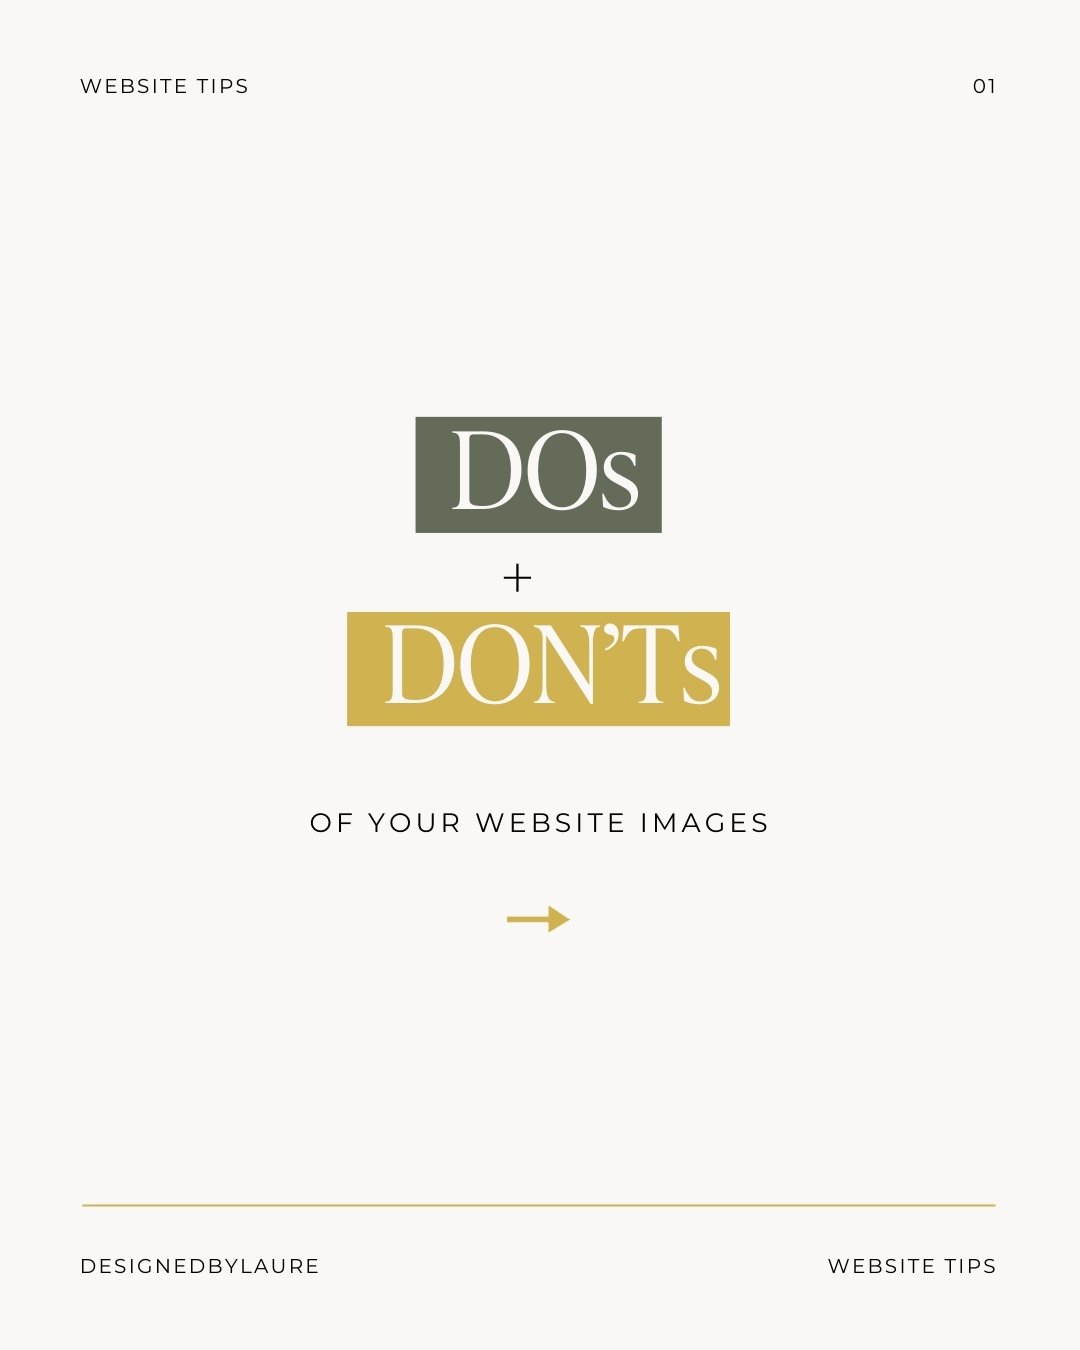 Your website images have issues. Let&rsquo;s fix them. ✨

Your images bring your website alive, and I understand sometimes can be difficult to manage if you have a large inventory, but there are so many easy ways to make them better and more impactfu